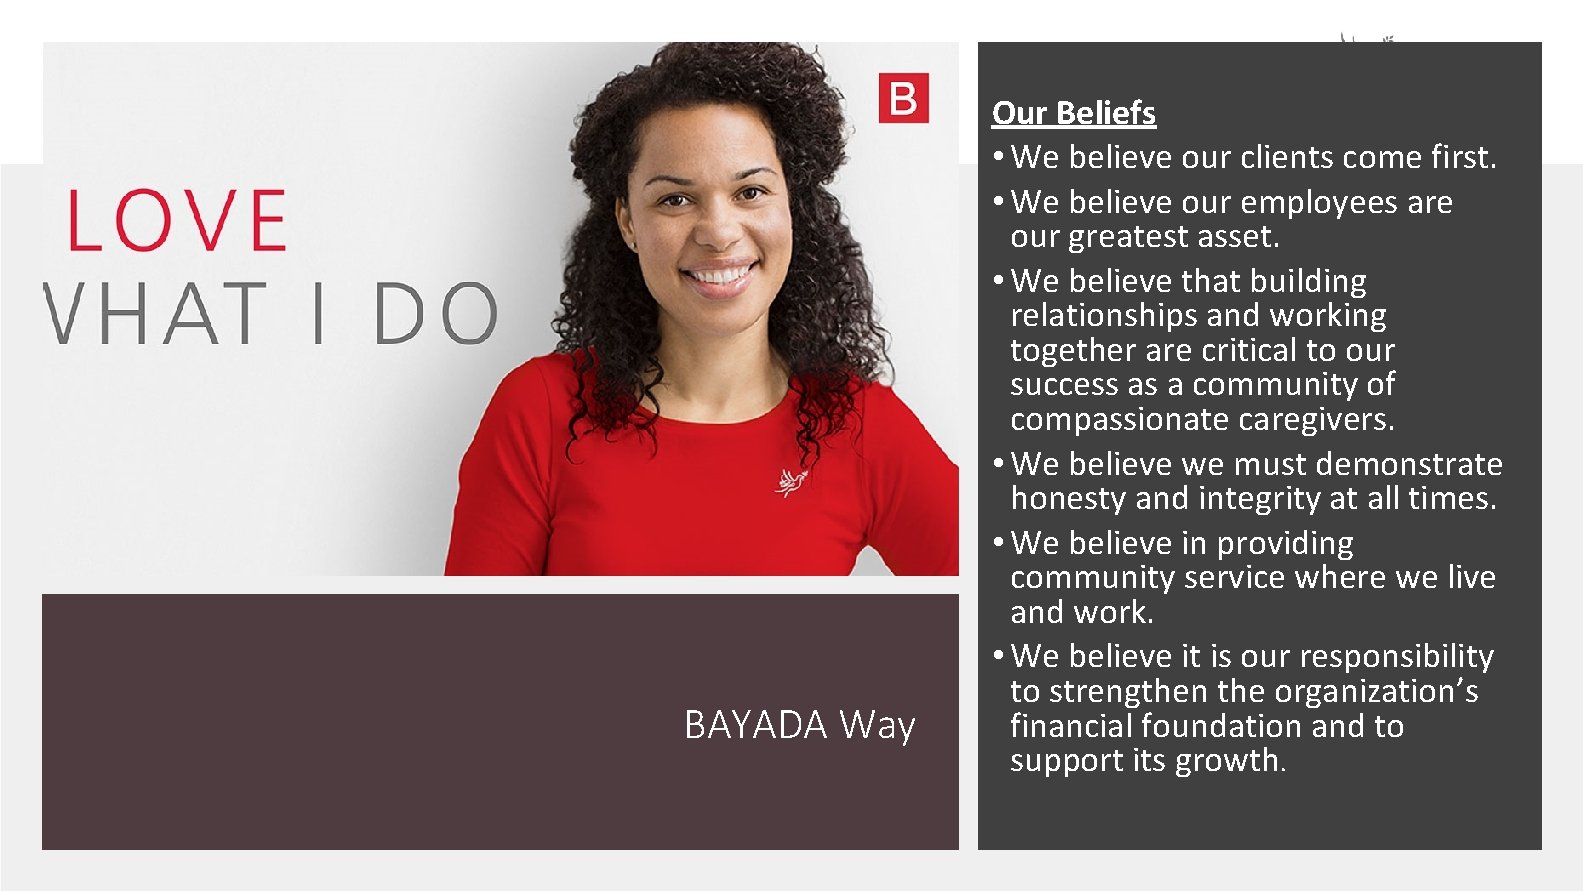 BAYADA Way Our Beliefs • We believe our clients come first. • We believe